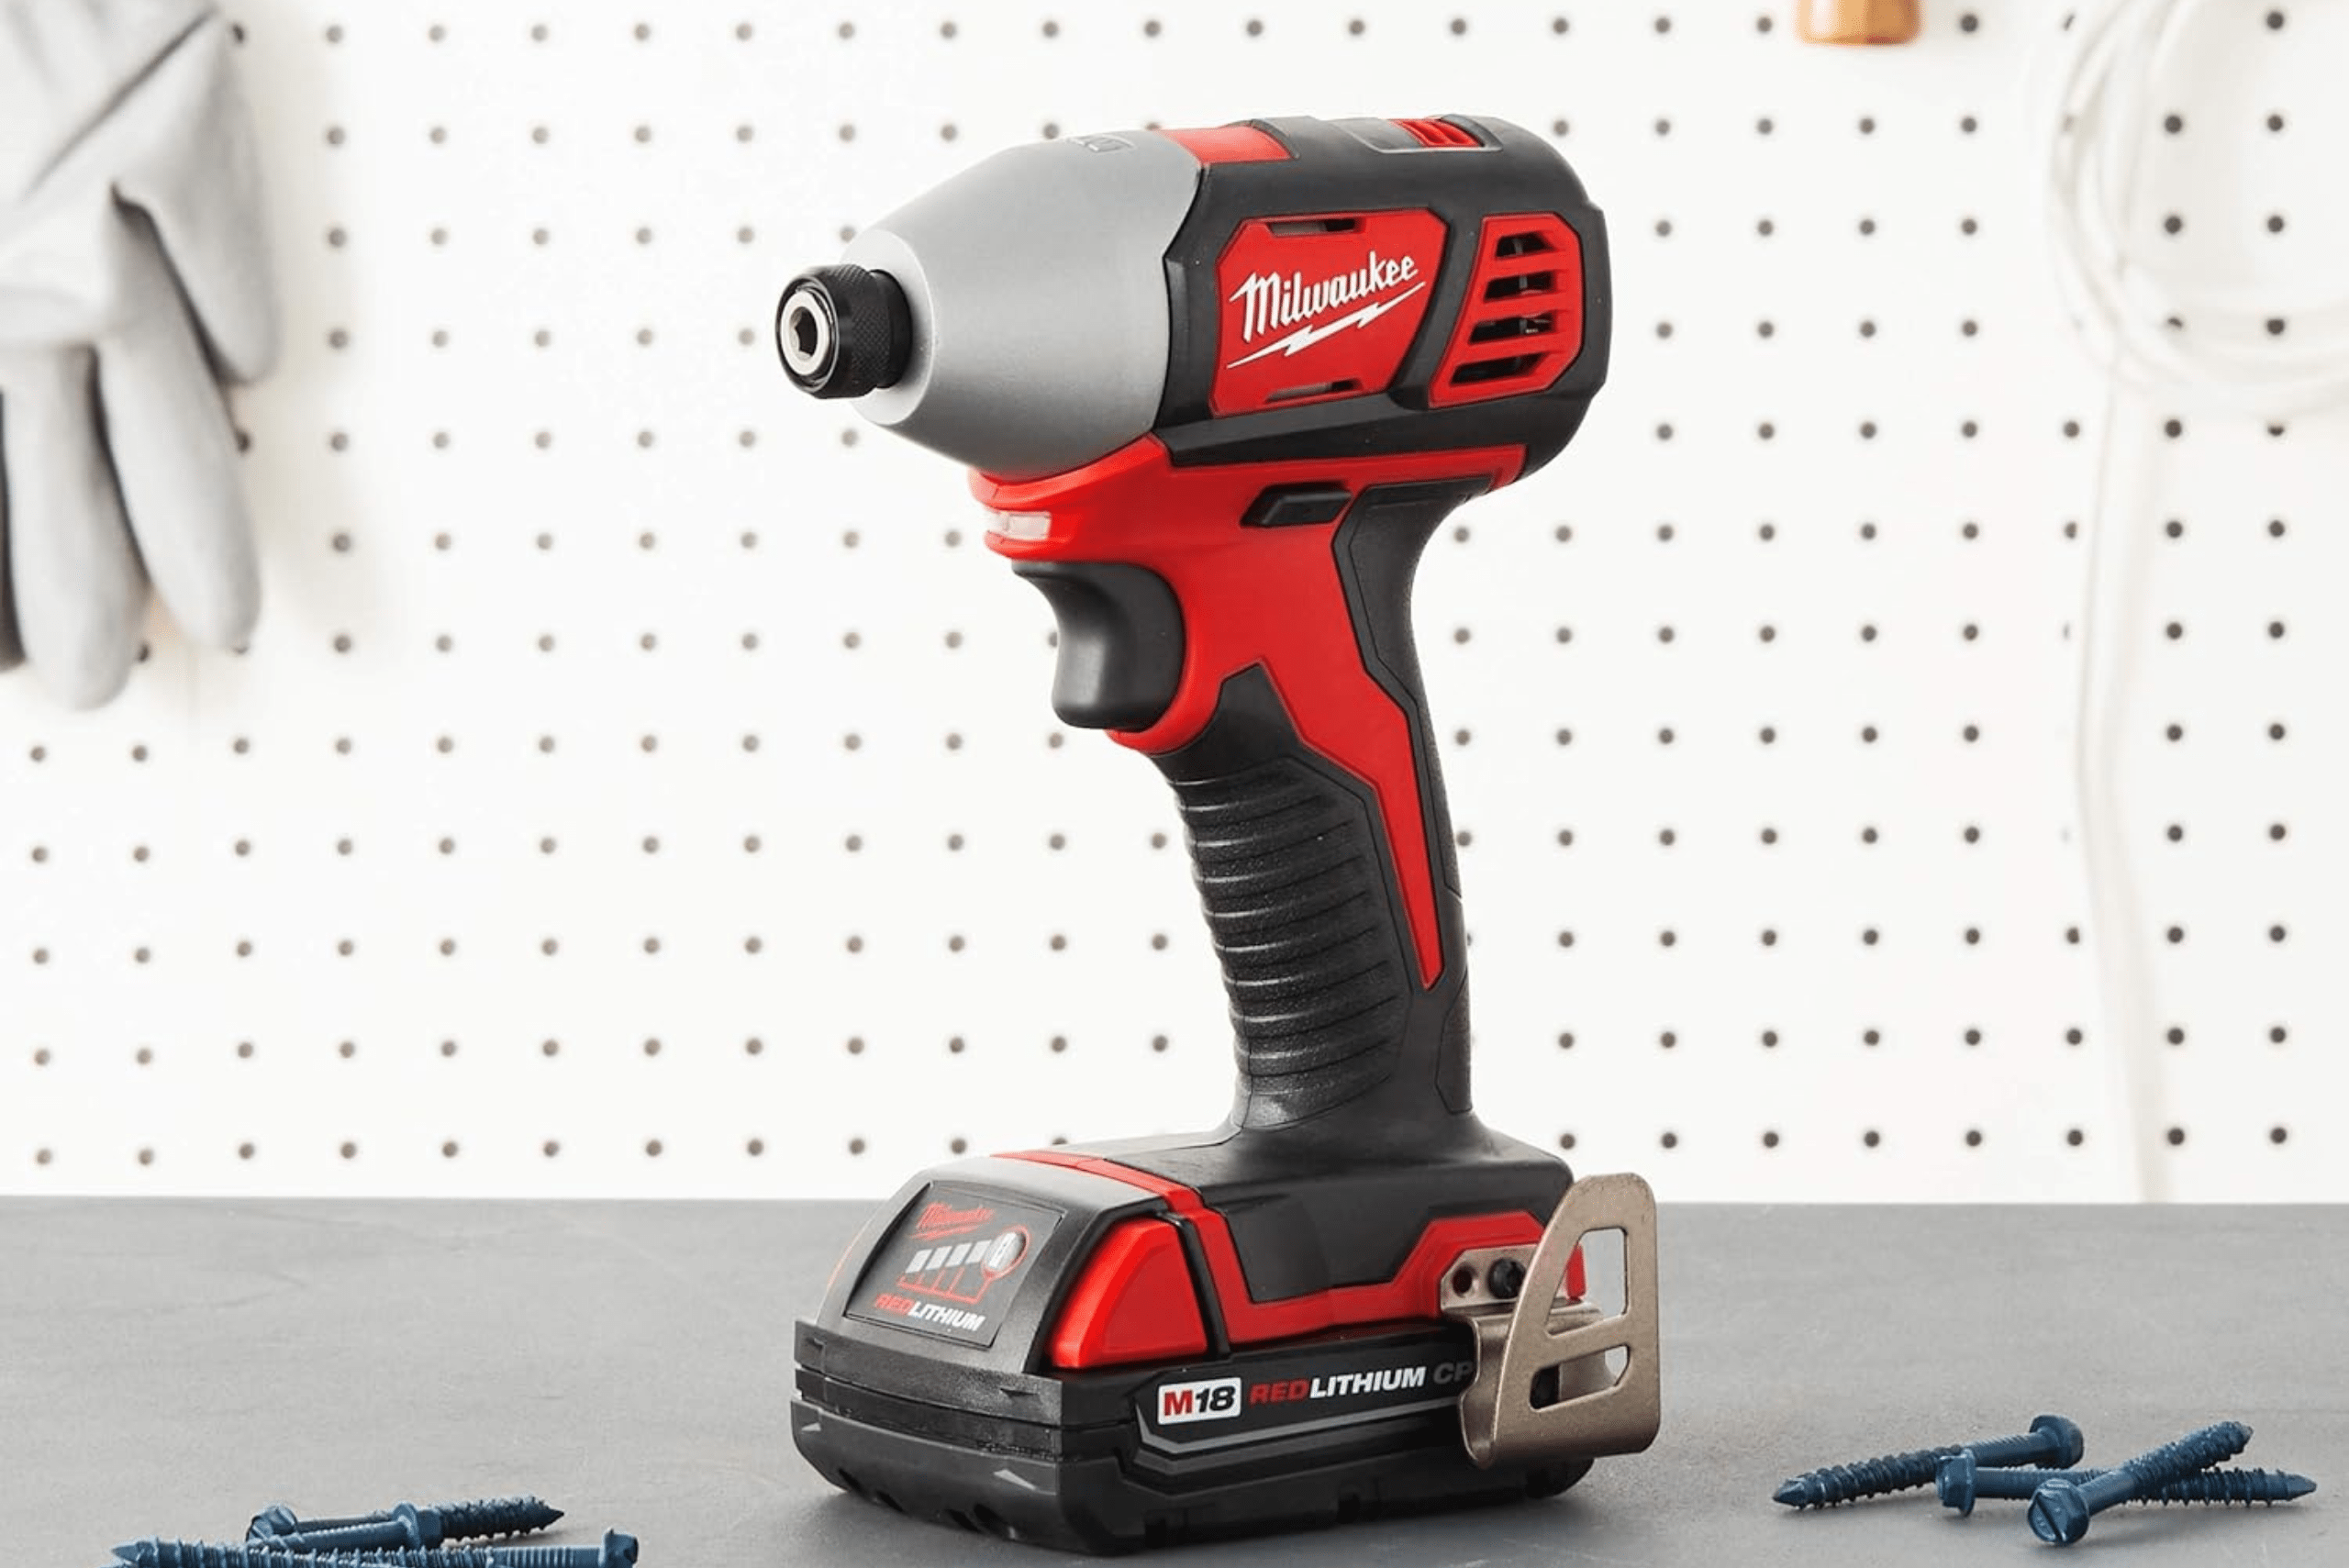 Impact driver placed on work bench.